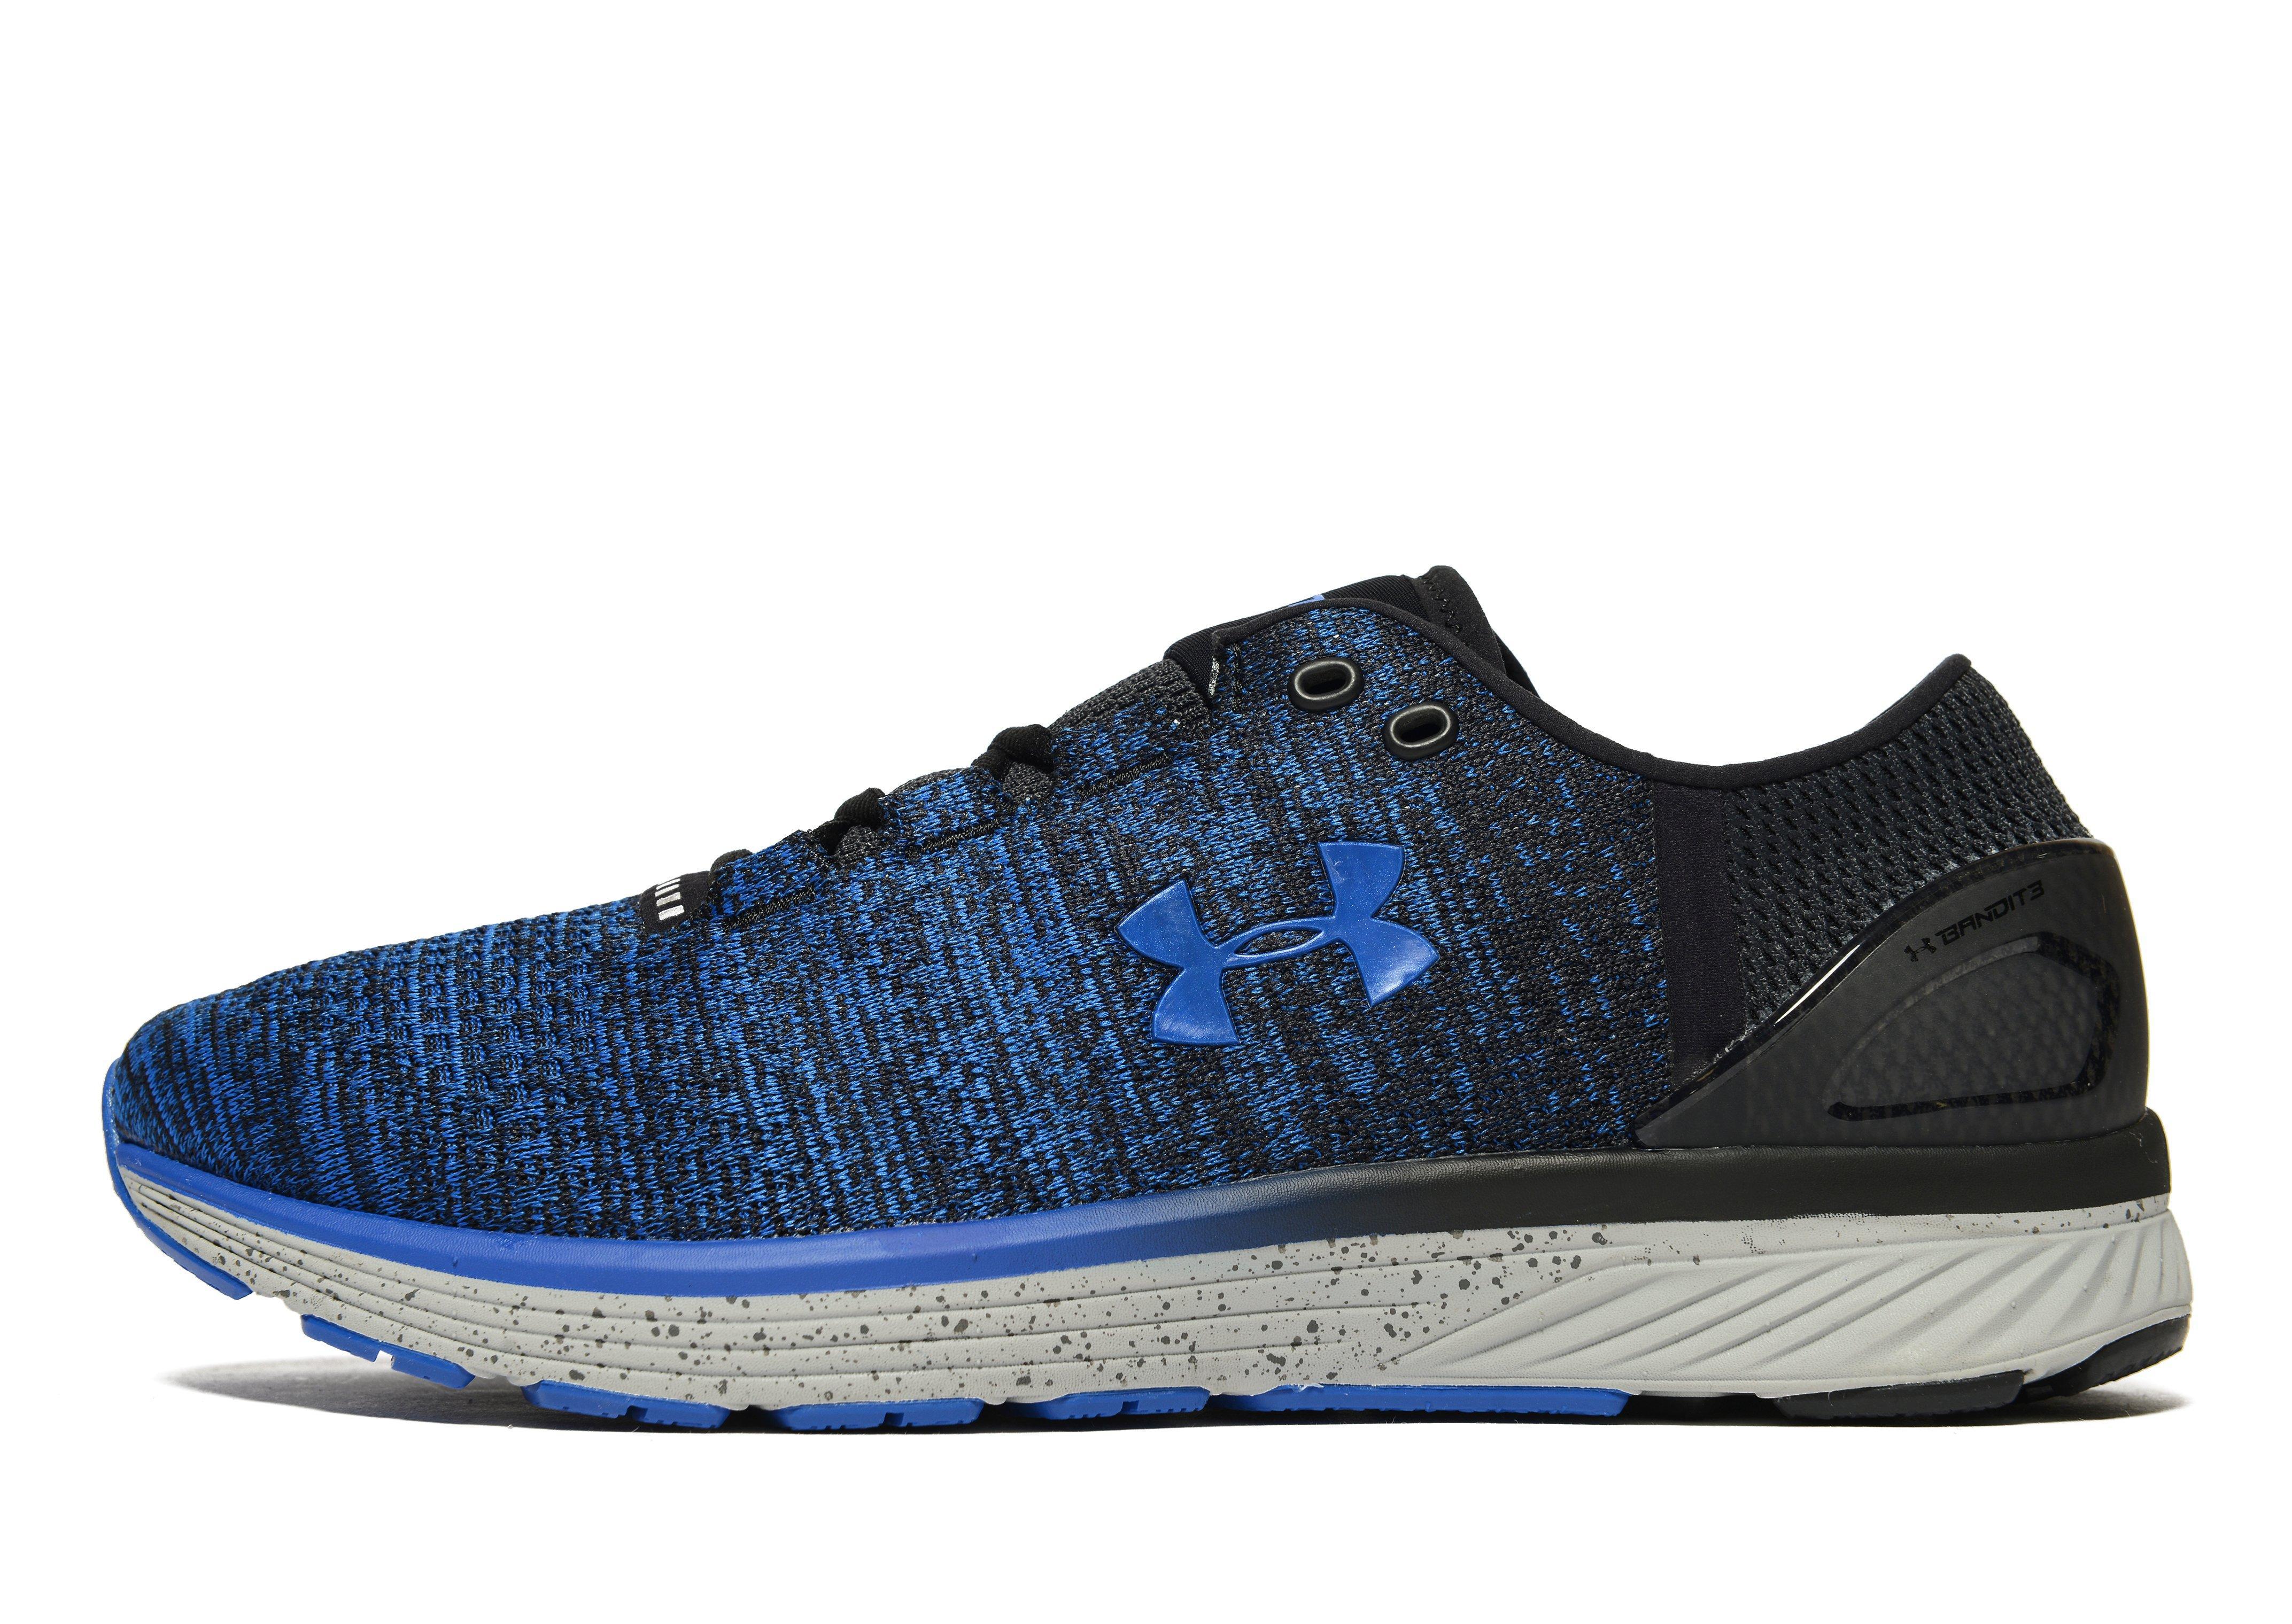 Lyst - Under armour Bandit 3 in Blue for Men